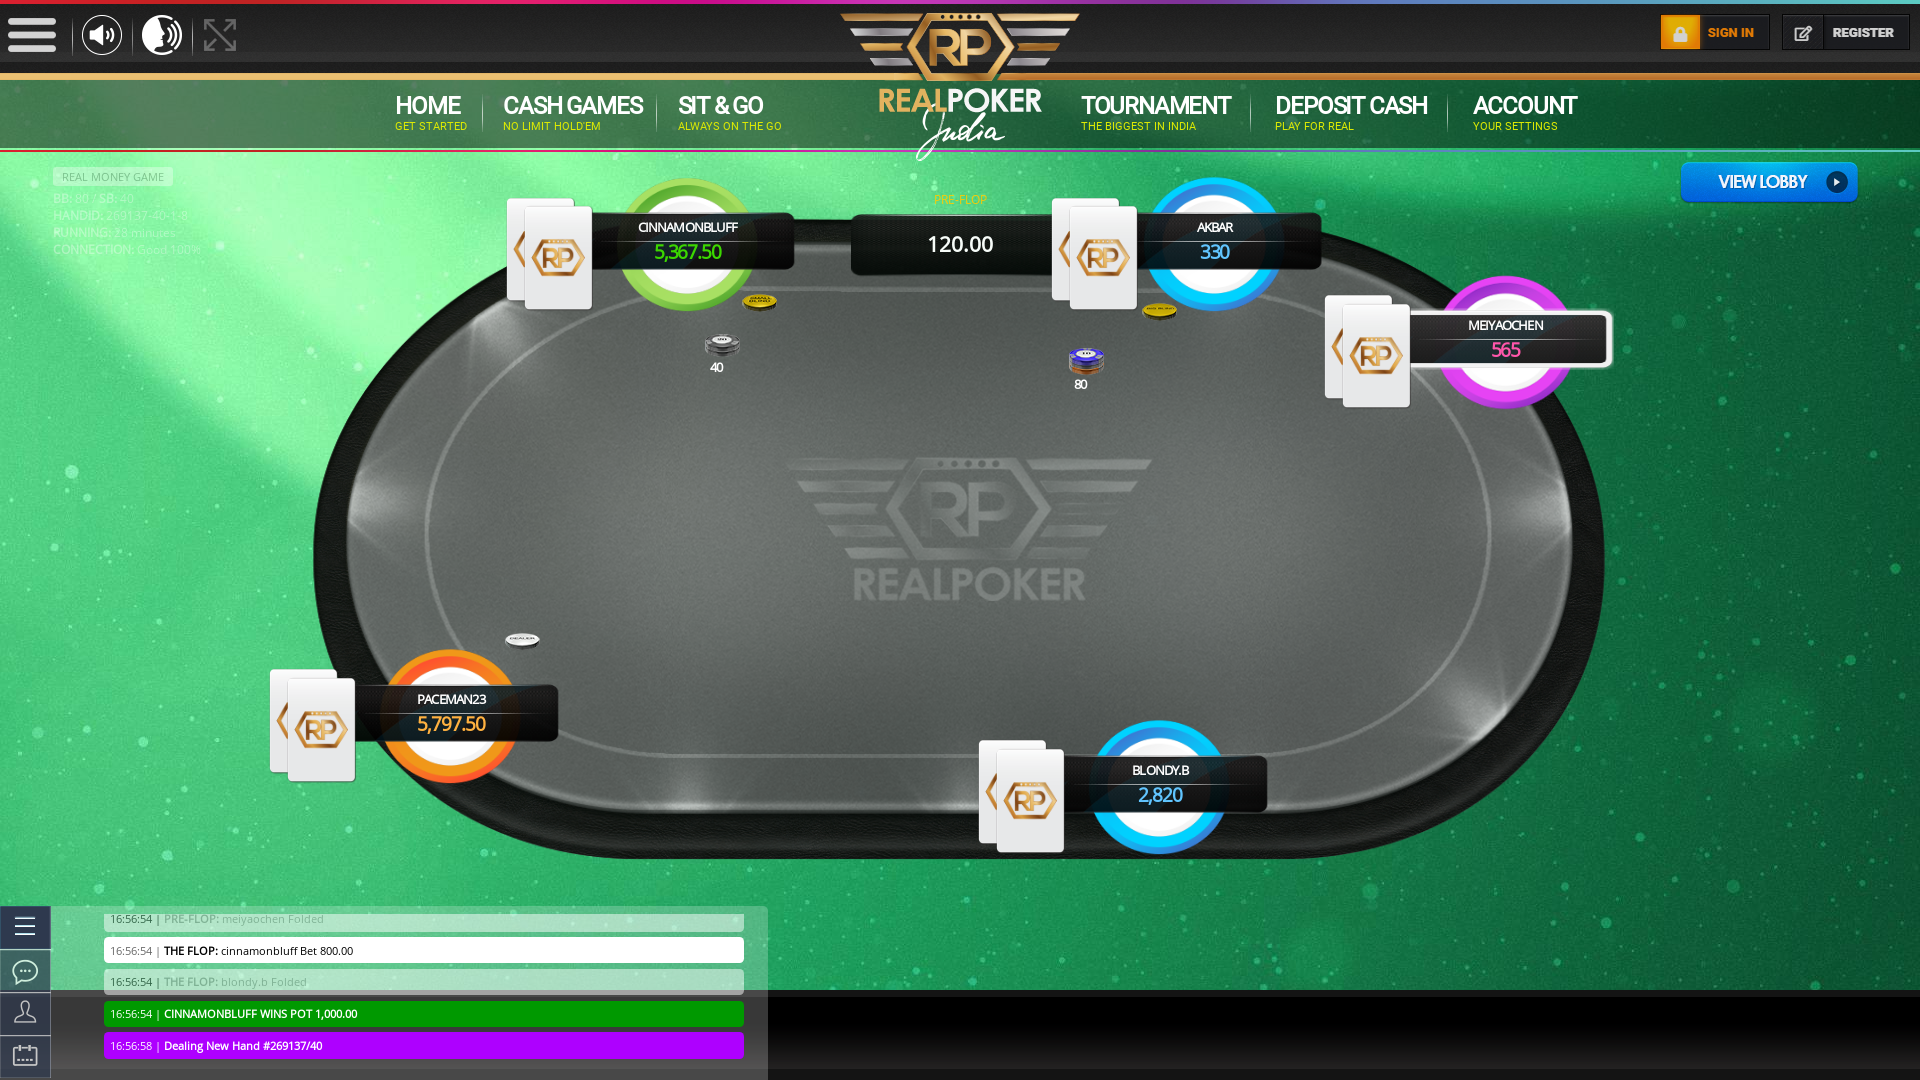 Indian poker on a 10 player table in the 28th minute